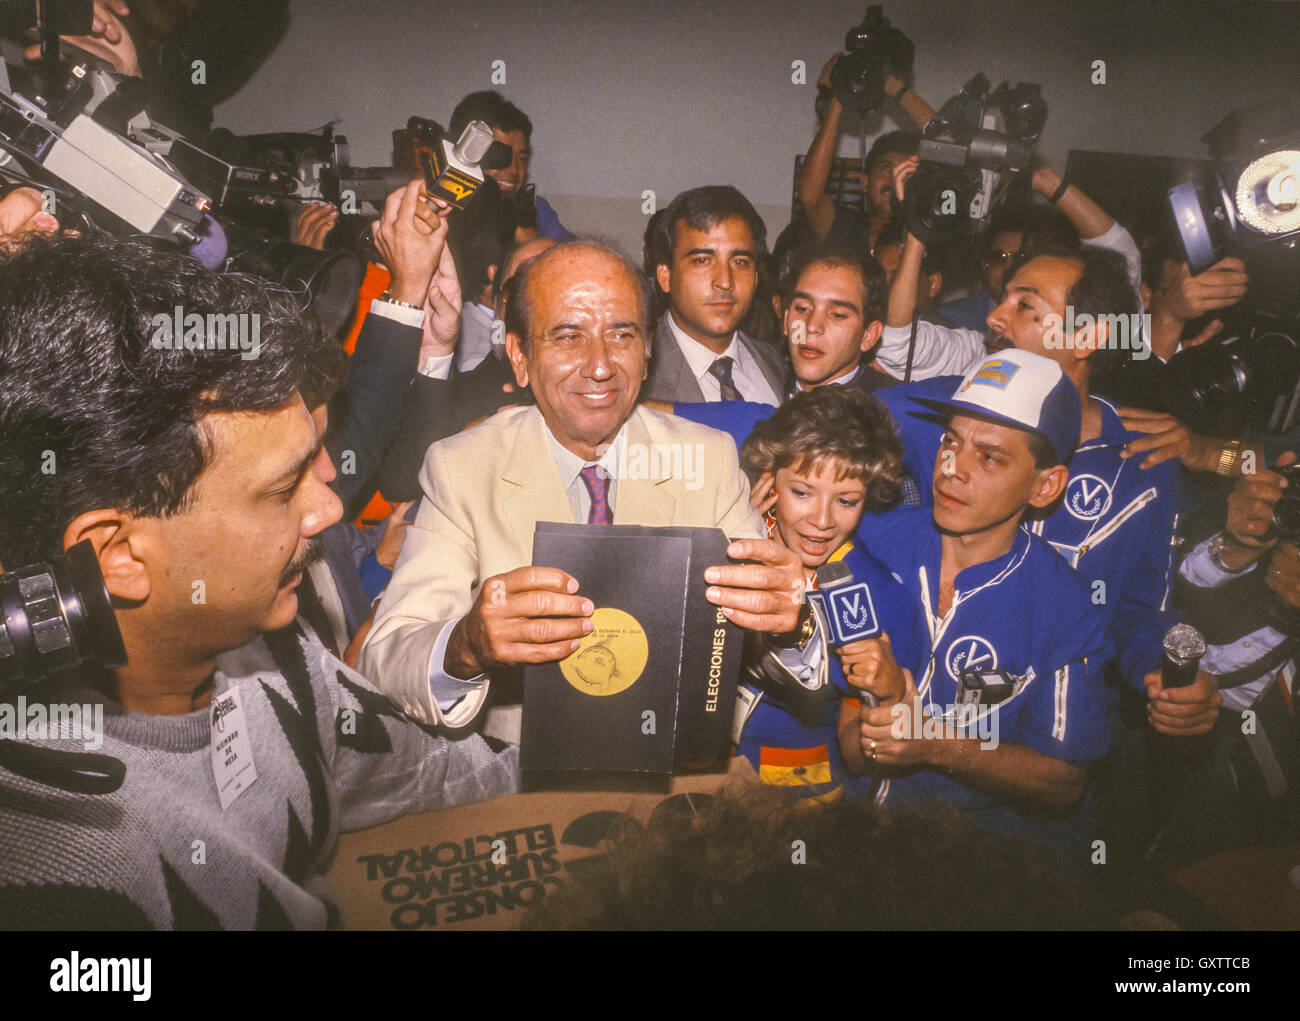 CARACAS, VENEZUELA - Presidential candidate Carlos Andres Perez casting his ballot at voting station. December 4, 1988 Stock Photo